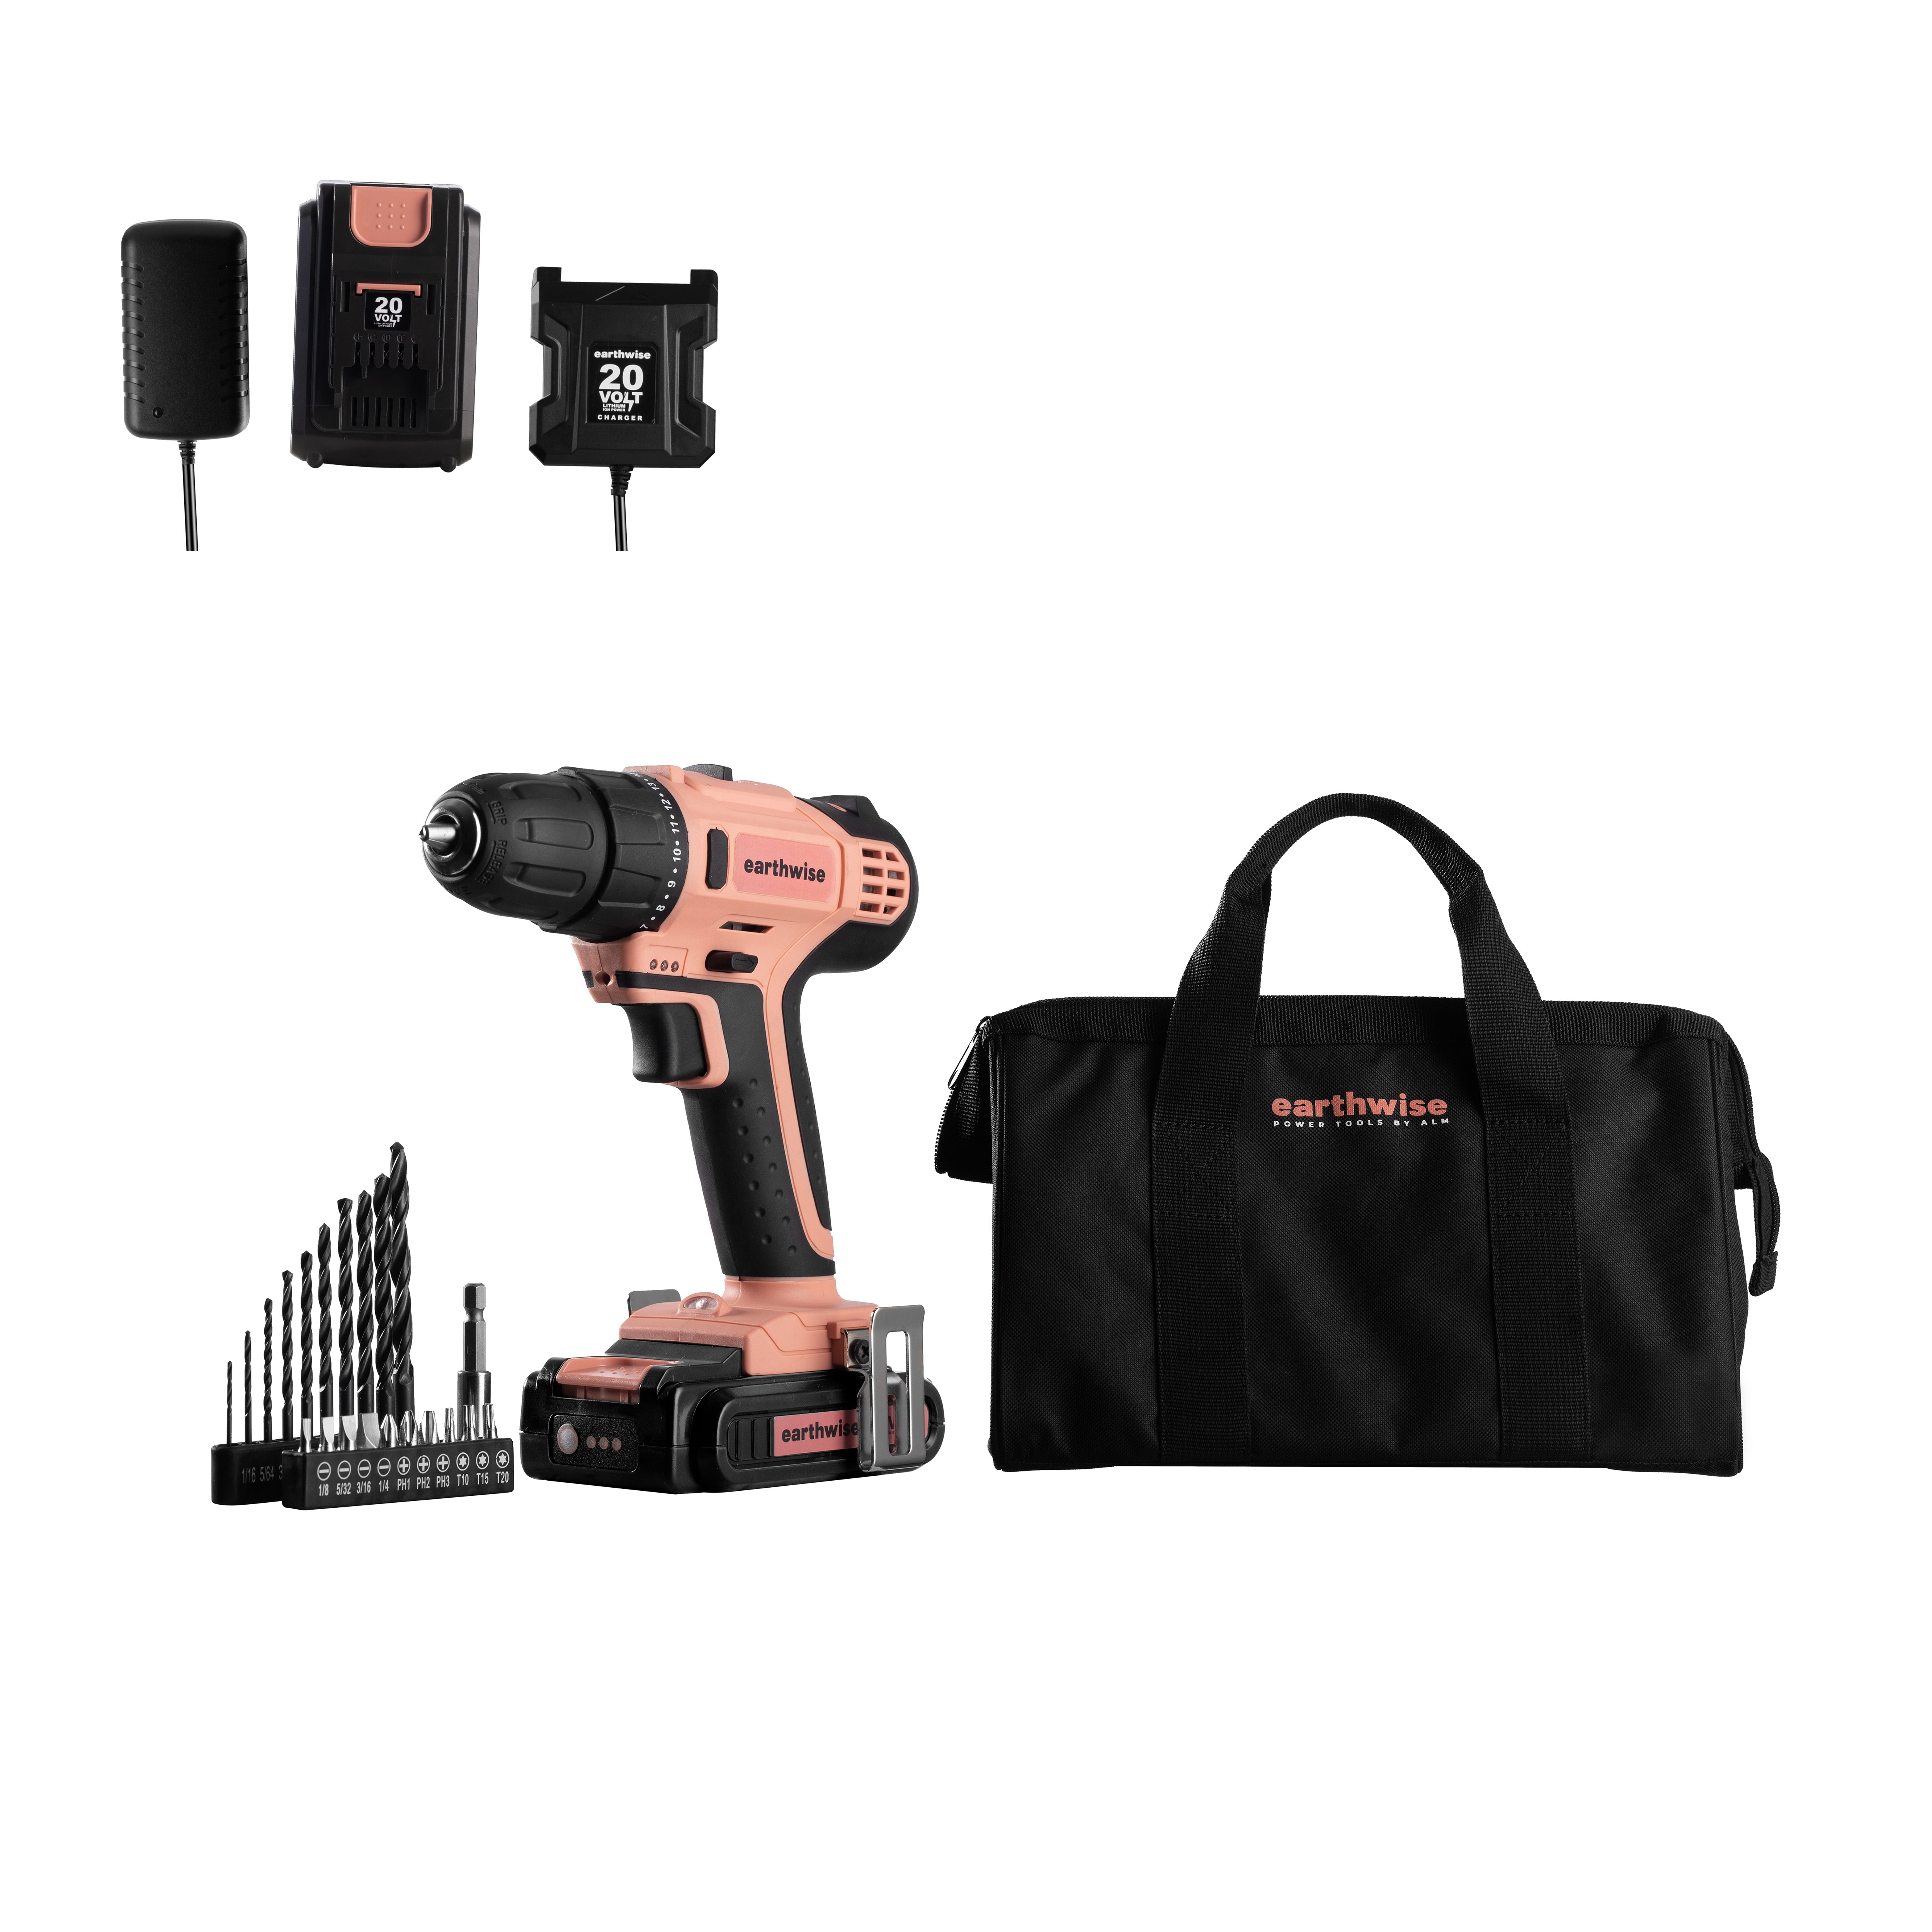 LDK-001 20-Volt 1.5Ah 3/8 Cordless Drill Set, Power Drill Set 21pcs, Tool bag, Battery and Charger Included